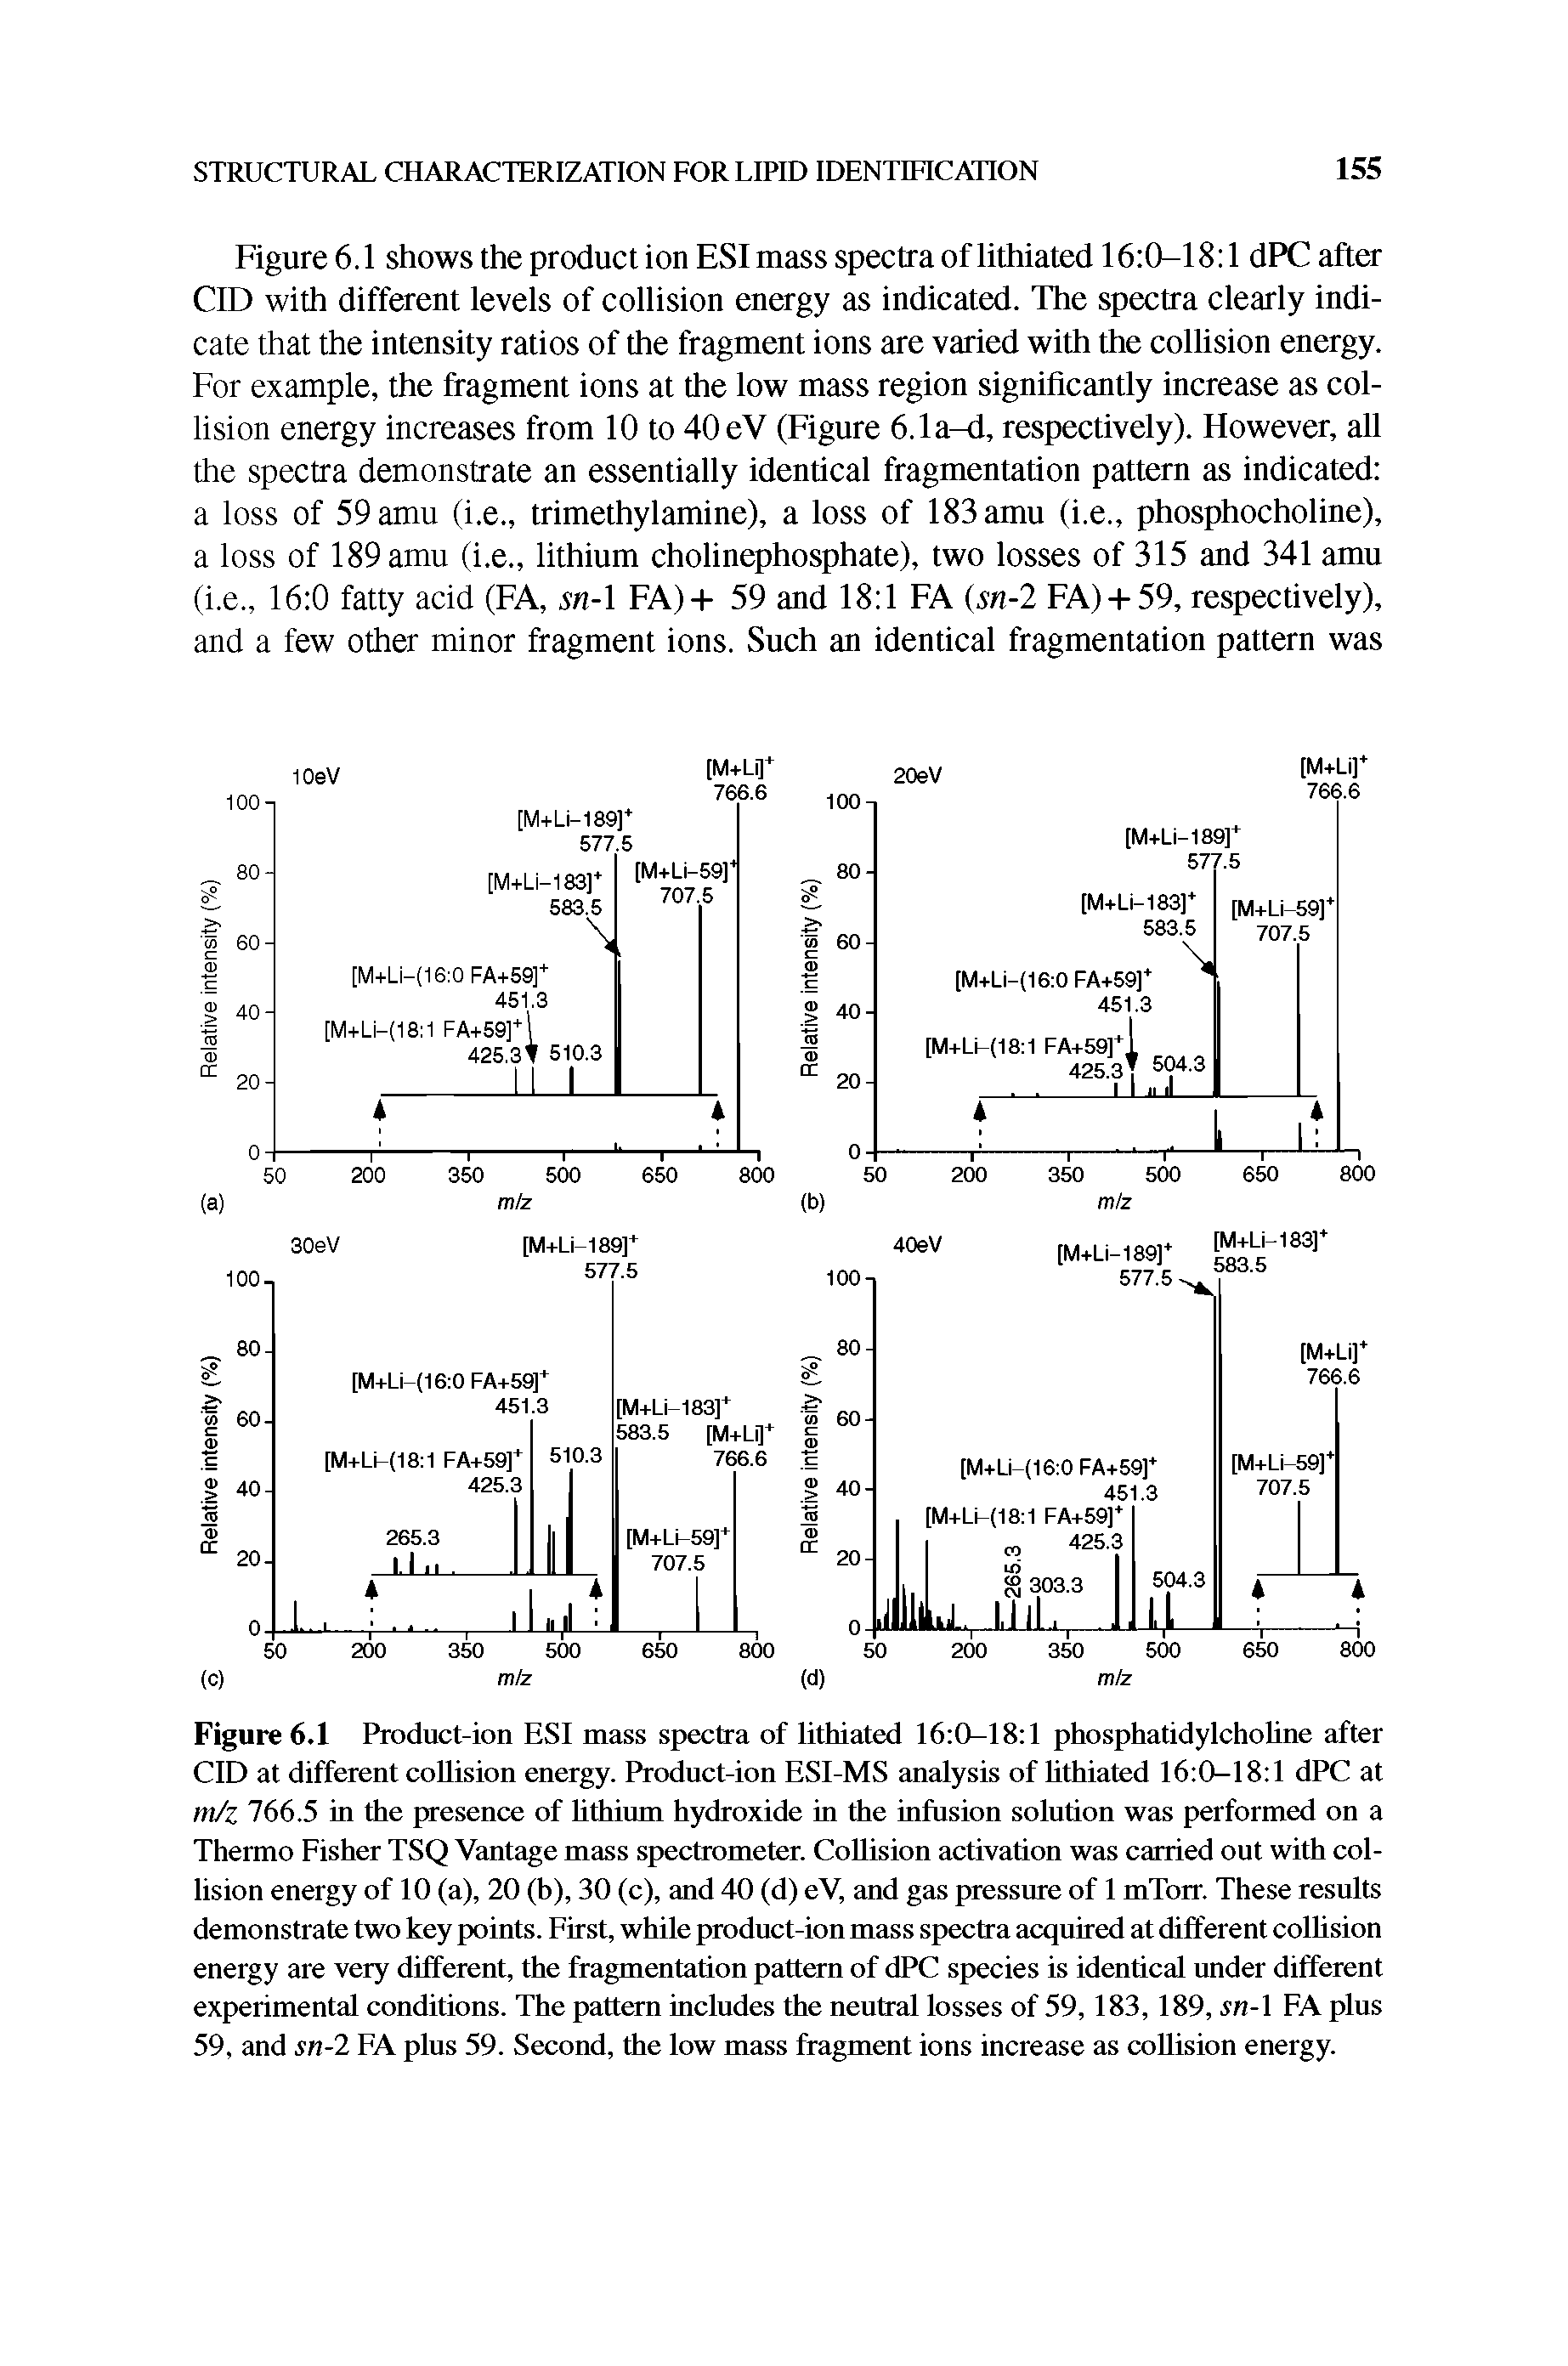 Figure 6.1 Product-ion ESI mass spectra of lithiated 16 0-18 1 phosphatidylcholine after CID at different collision energy. Product-ion ESI-MS analysis of hthiated 16 0-18 1 dPC at m/z 766.5 in the presence of lithium hydroxide in the infusion solution was performed on a Thermo Fisher TSQ Vantage mass spectrometer. Collision activation was carried out with collision energy of 10 (a), 20 (h), 30 (c), and 40 (d) eV, and gas pressure of 1 mTorr. These results demonstrate two key points. First, while product-ion mass spectra acquired at different collision energy are very different, the fragmentation pattern of dPC species is identical under different experimental conditions. The pattern includes the neutral losses of 59,183,189, sn- FA plus 59, and sn-2 FA plus 59. Second, the low mass fragment ions increase as collision energy.